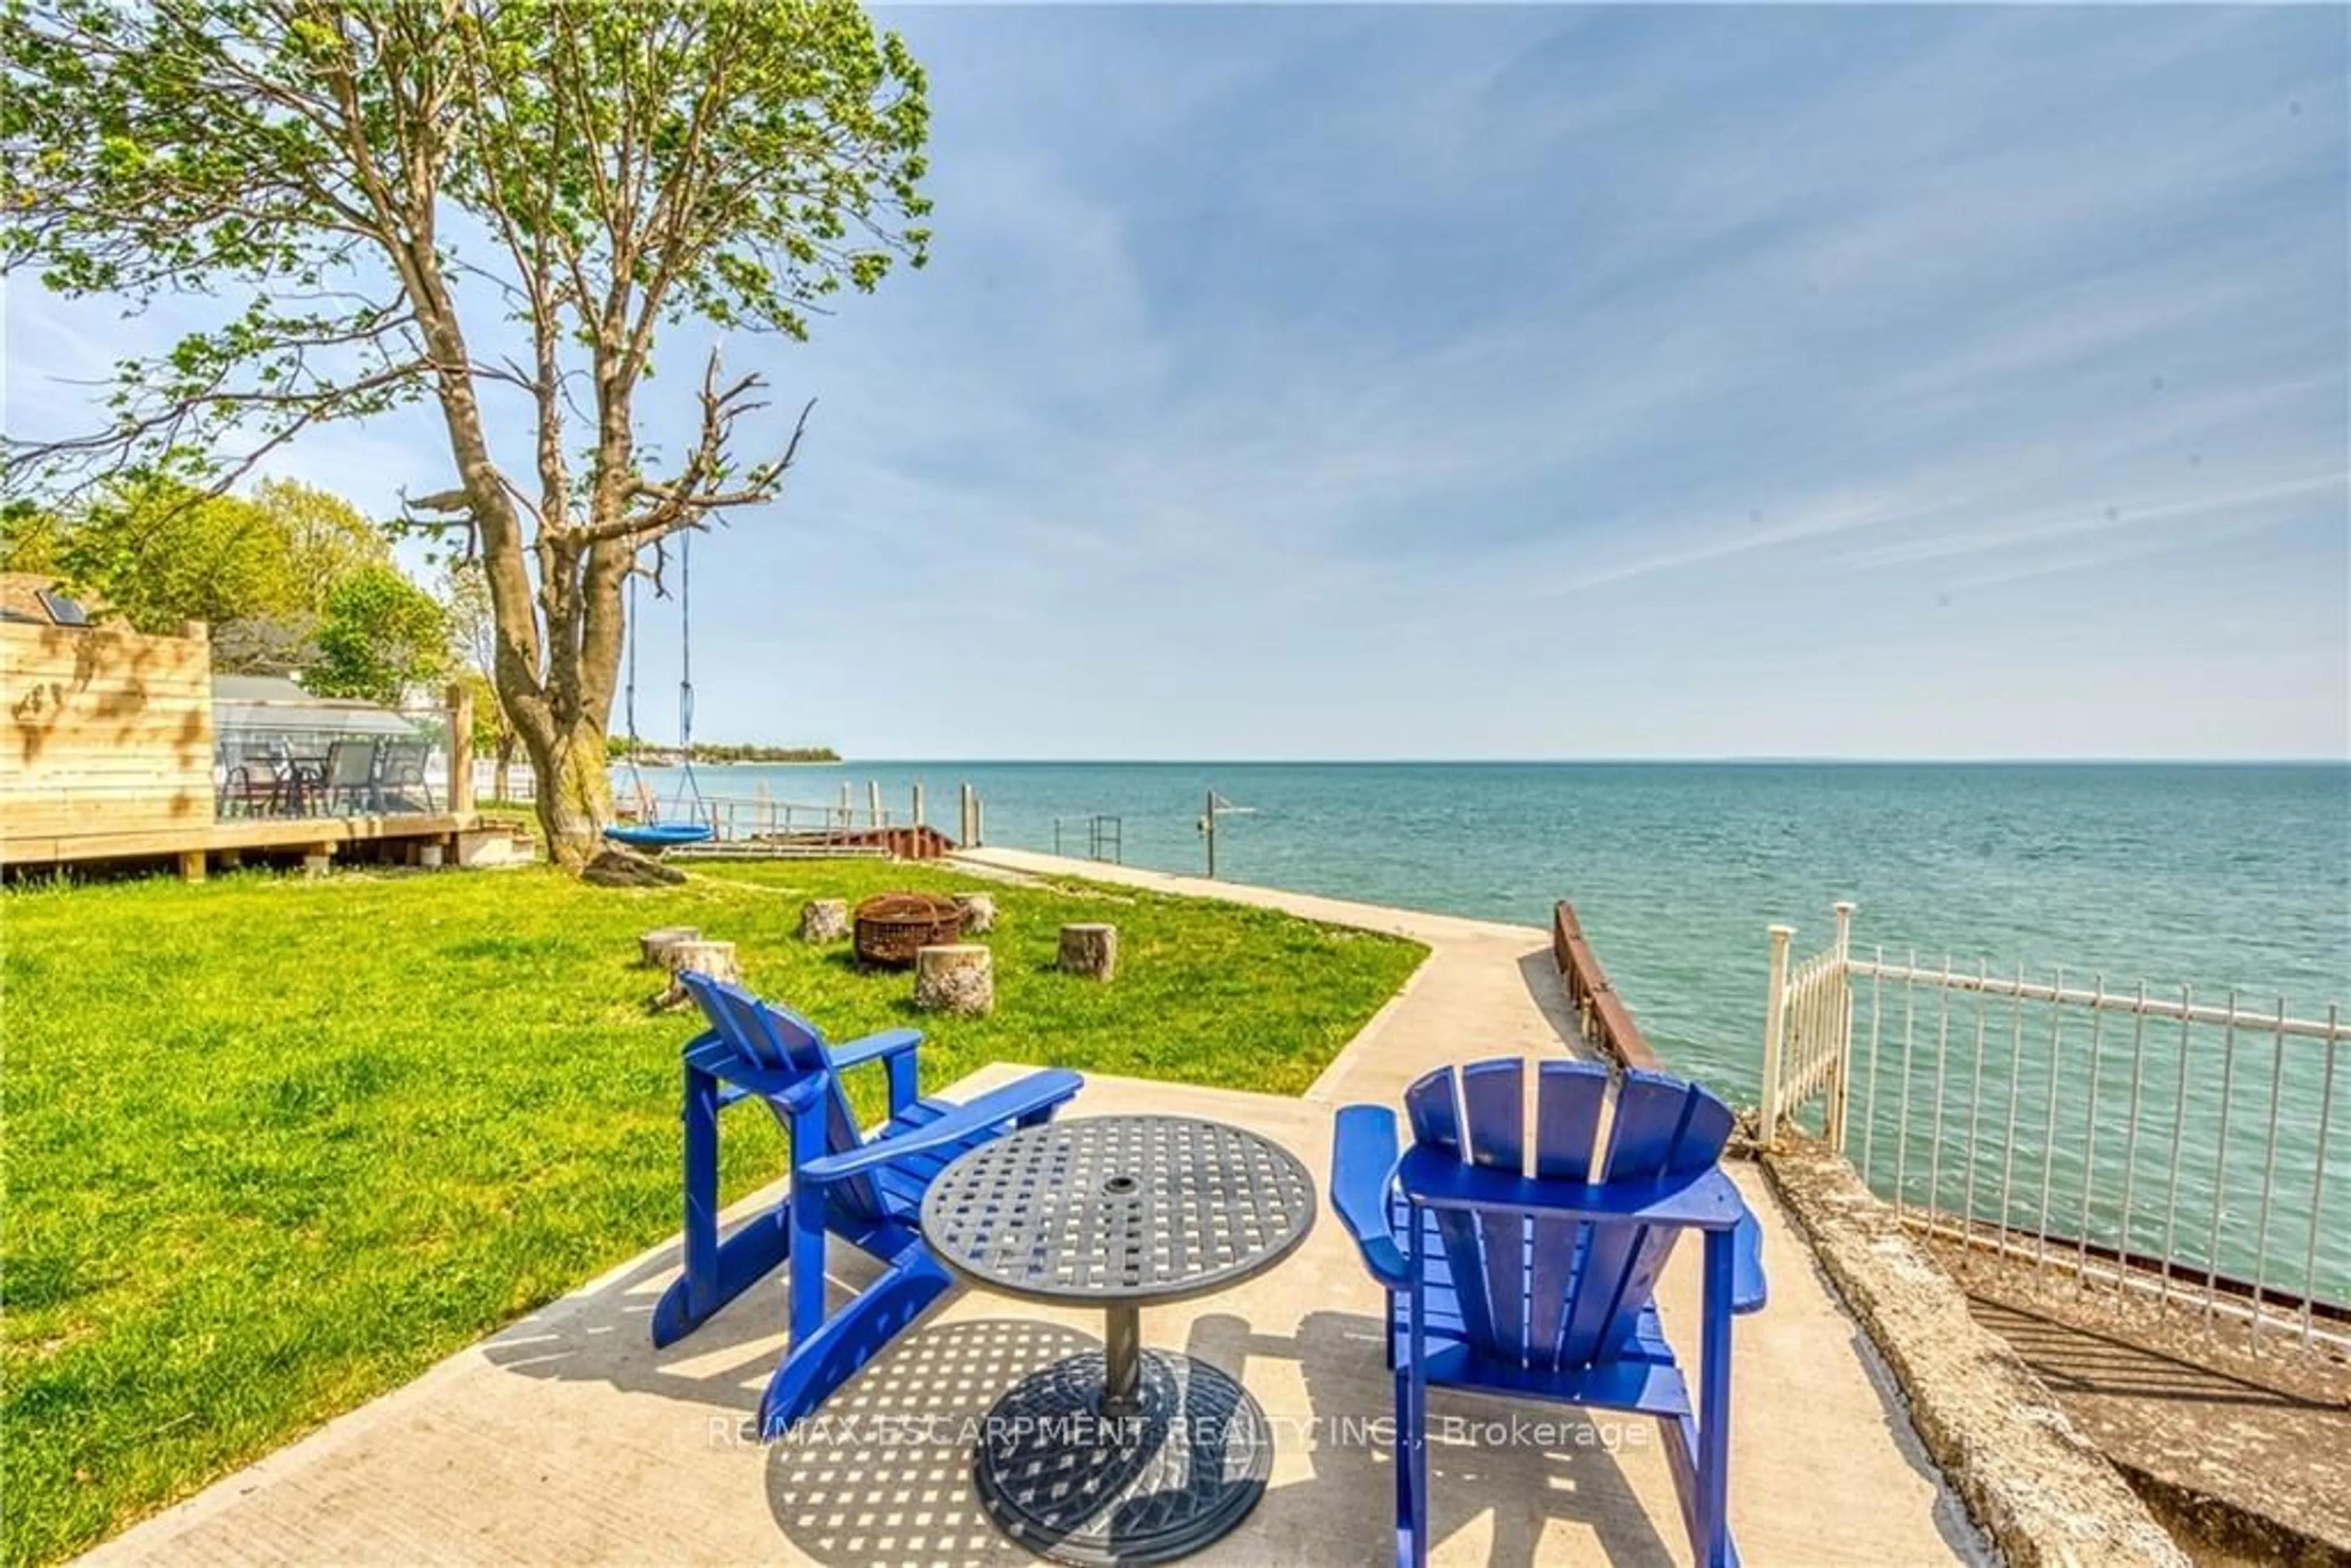 Lakeview for 2898 North Shore Dr, Haldimand Ontario N0A 1K0